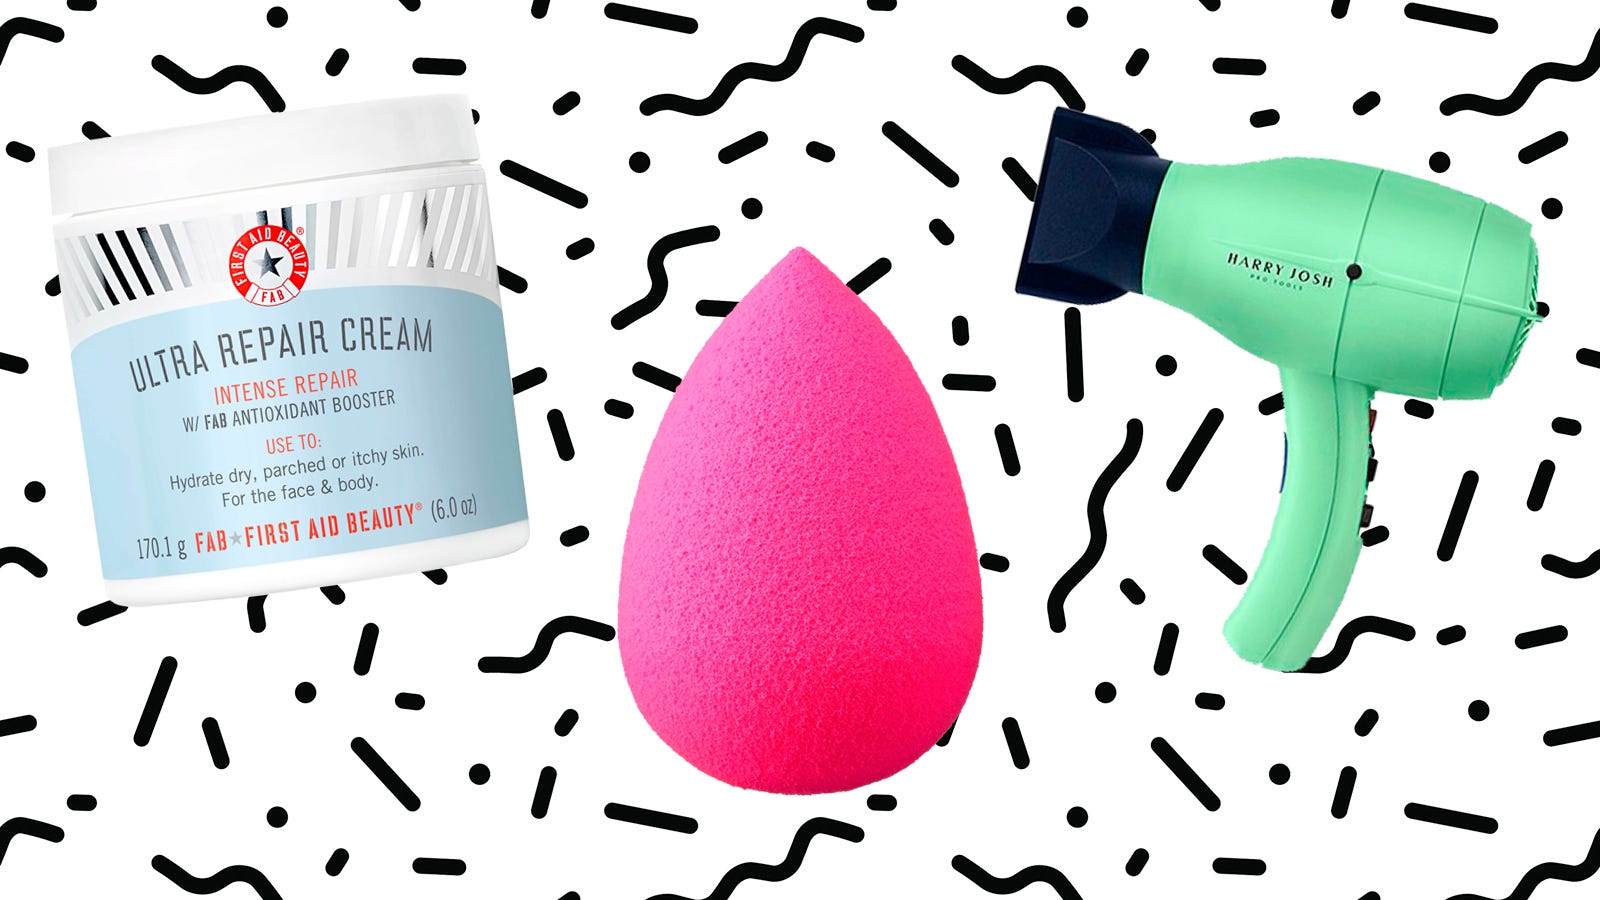 15 makeup, hair care, and skin care must-buys in this weekend's massive Dermstore beauty sale